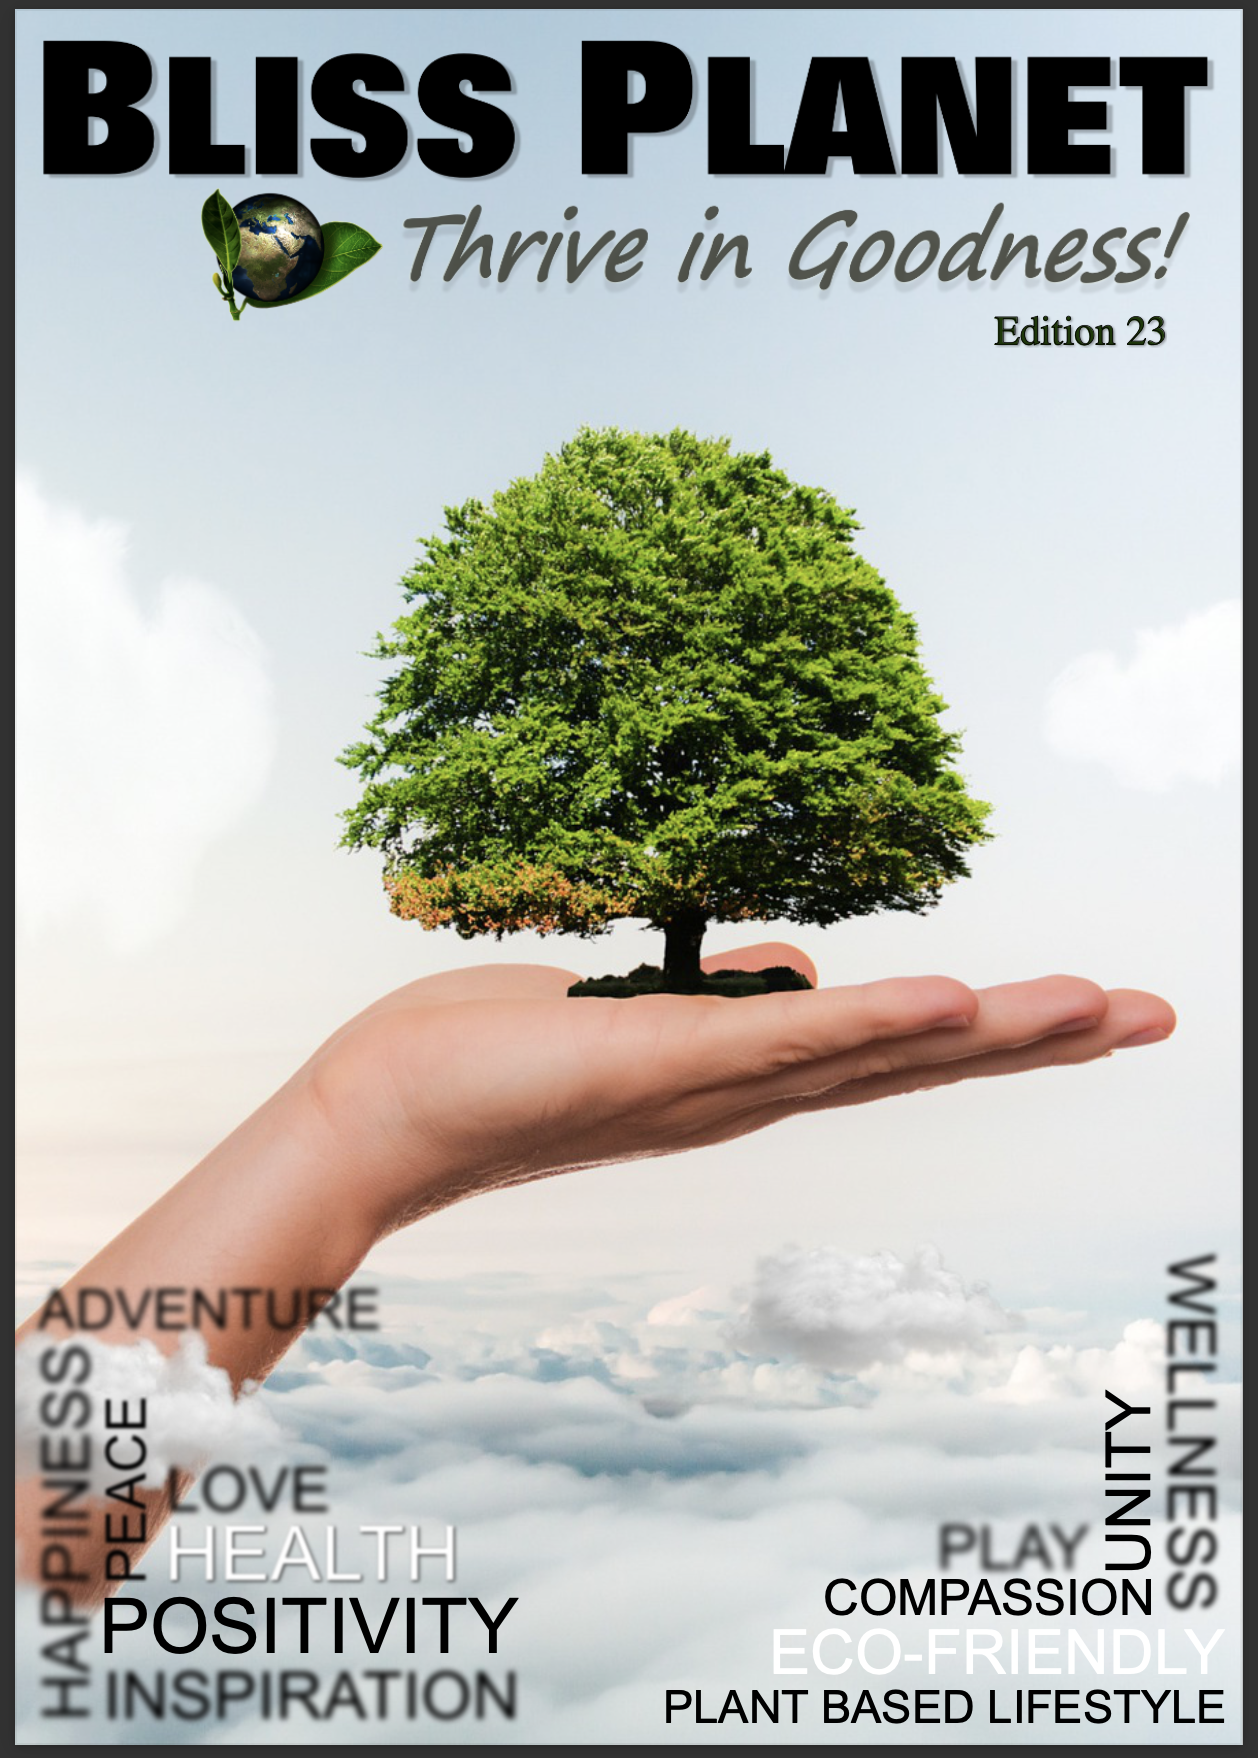 Edition 23 – Magazine For The Wellness For People, Animals, and the Planet